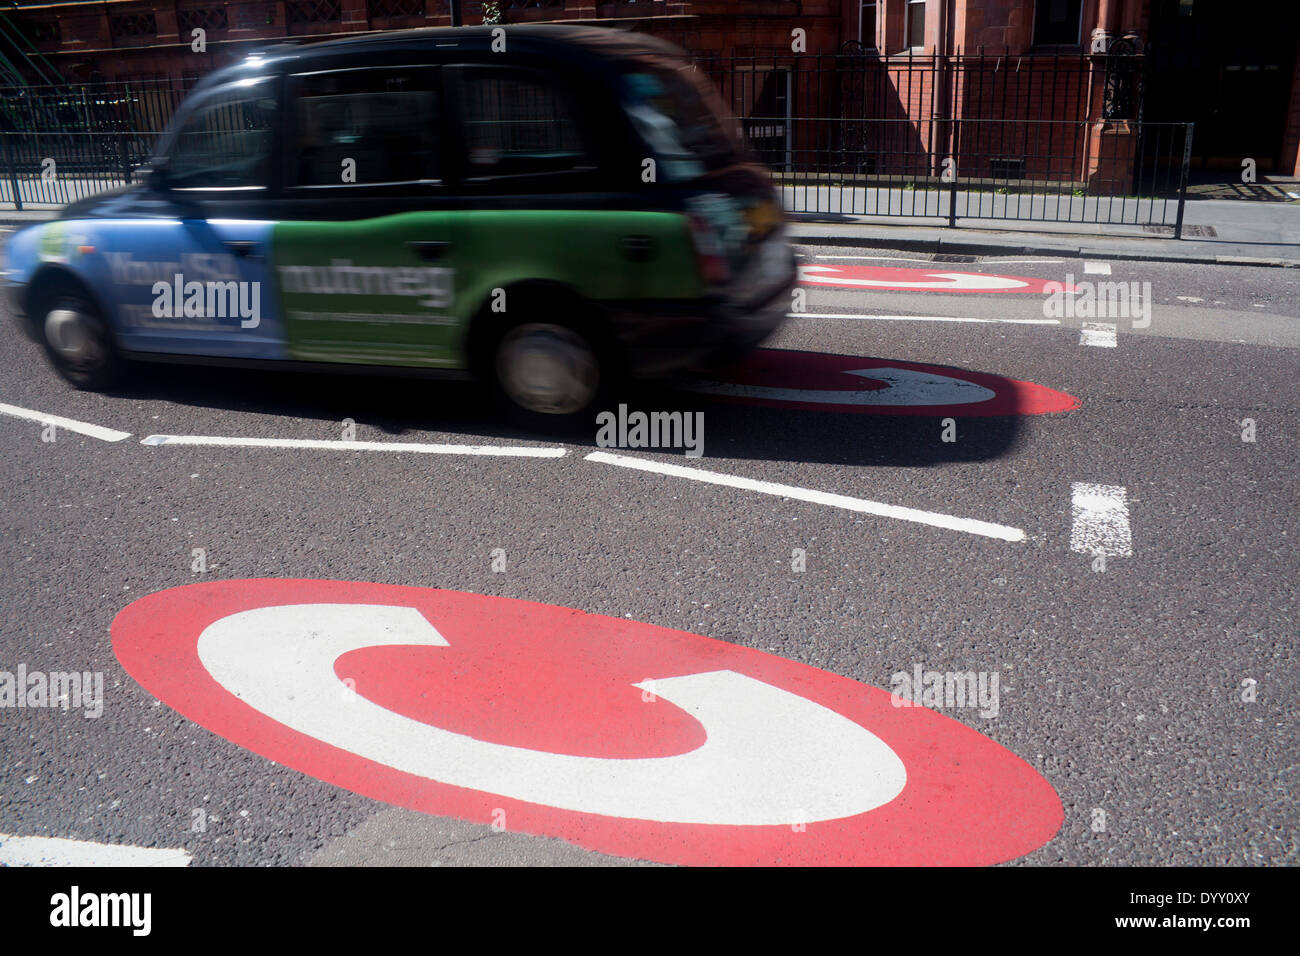 Congestion charge signs Black taxi cab car crossing into Central London traffic congestion zone Gower Street London England UK Stock Photo